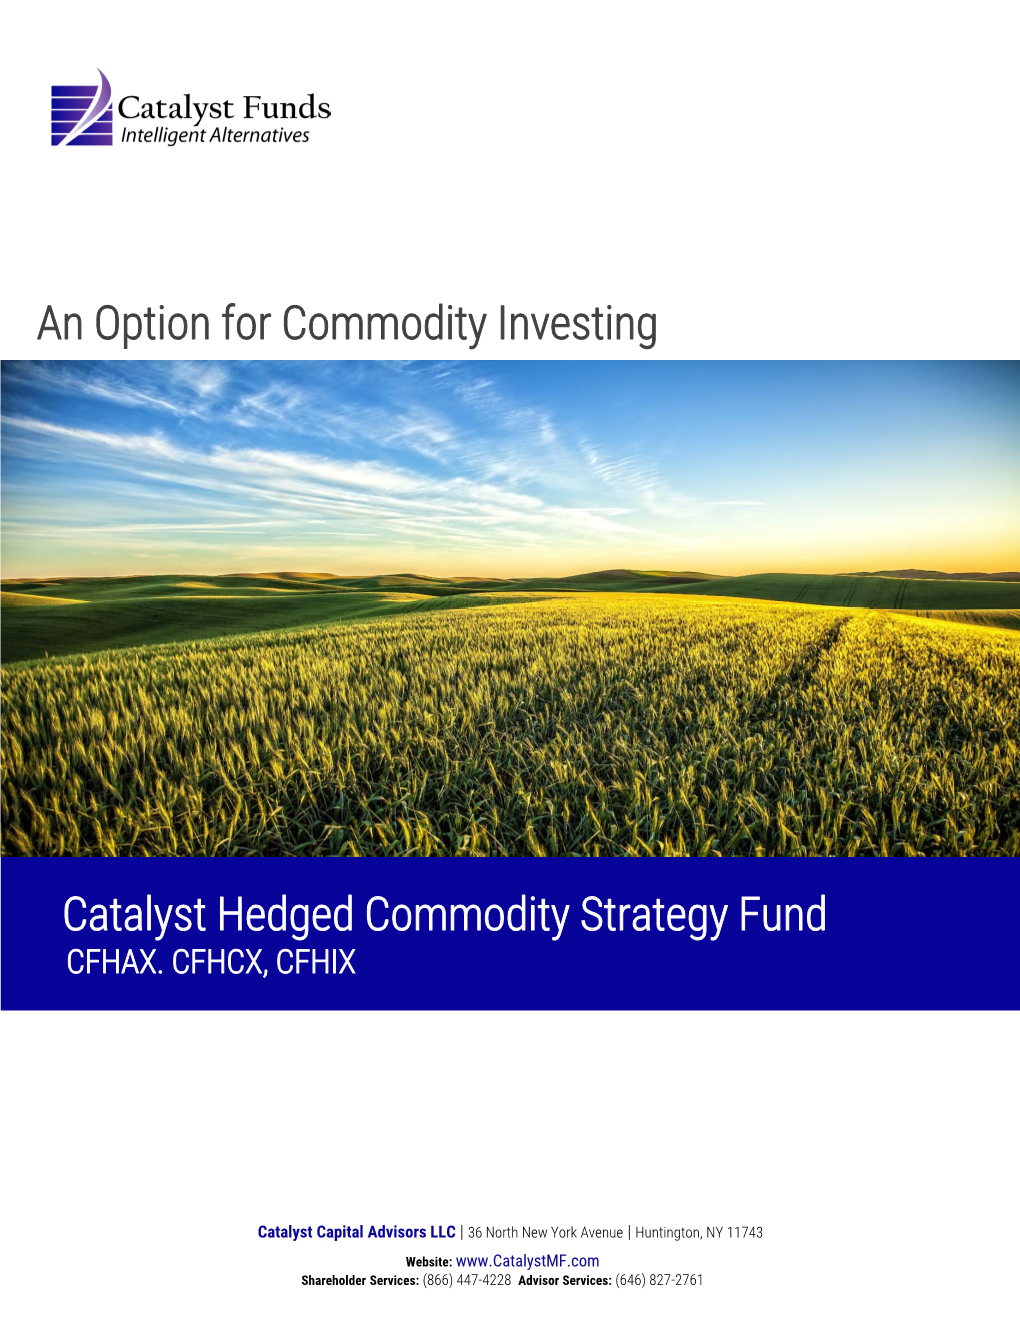 Catalyst Hedged Commodity Strategy Fund an Option for Commodity